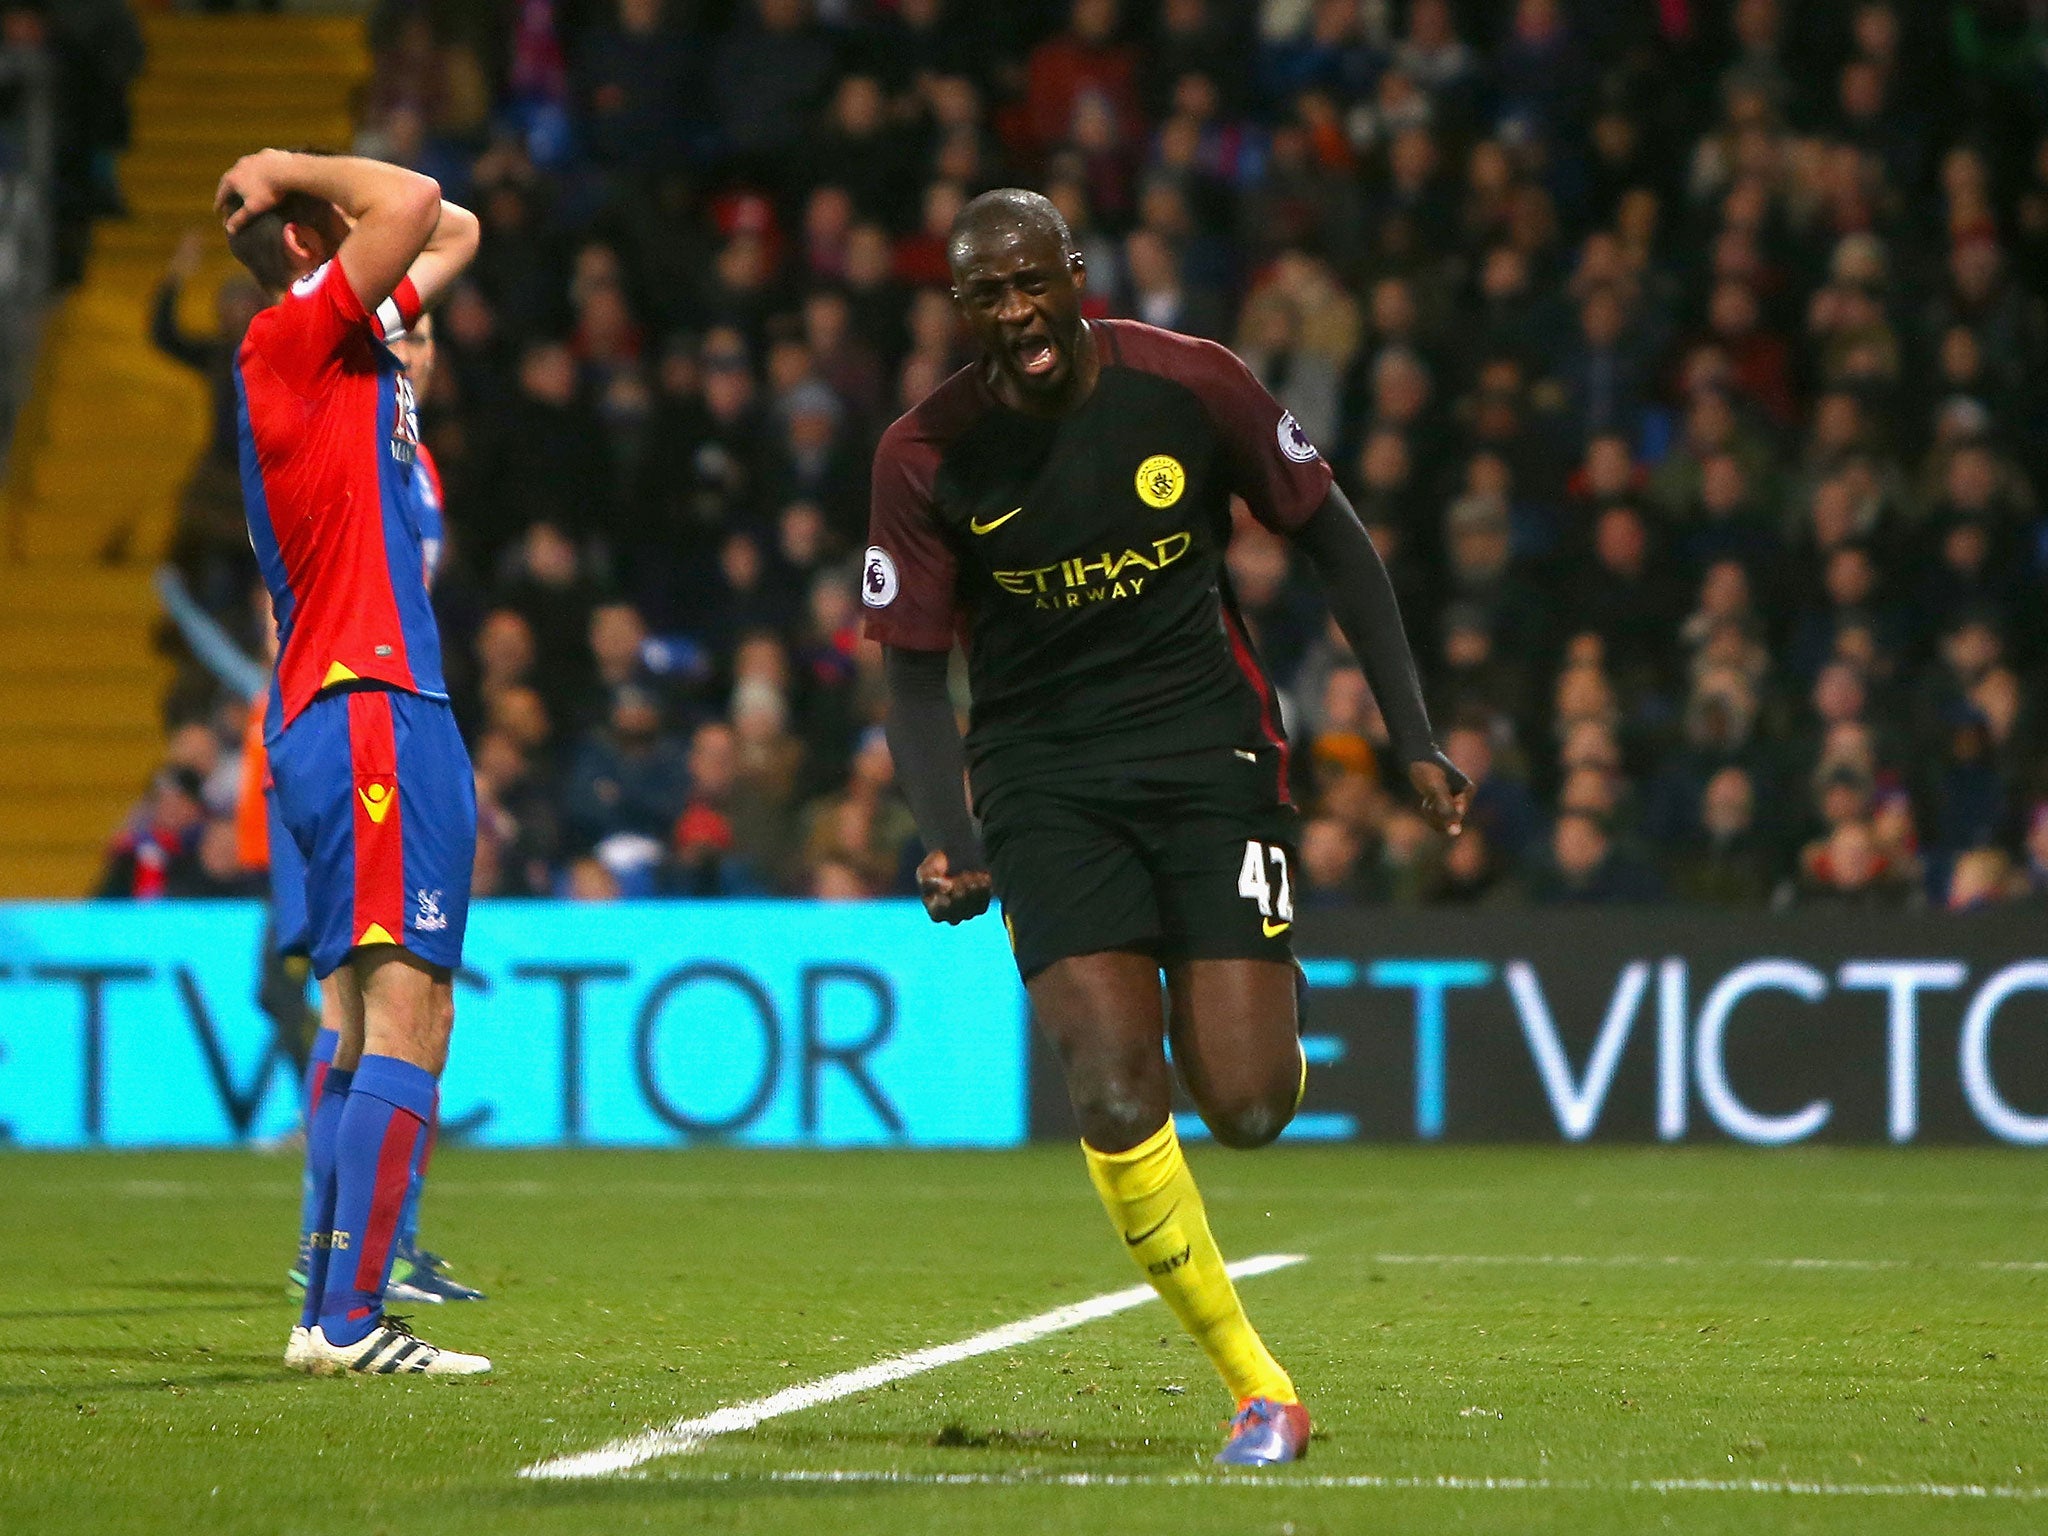 Toure has returned to the Manchester City first team after a prolonged period out in the cold